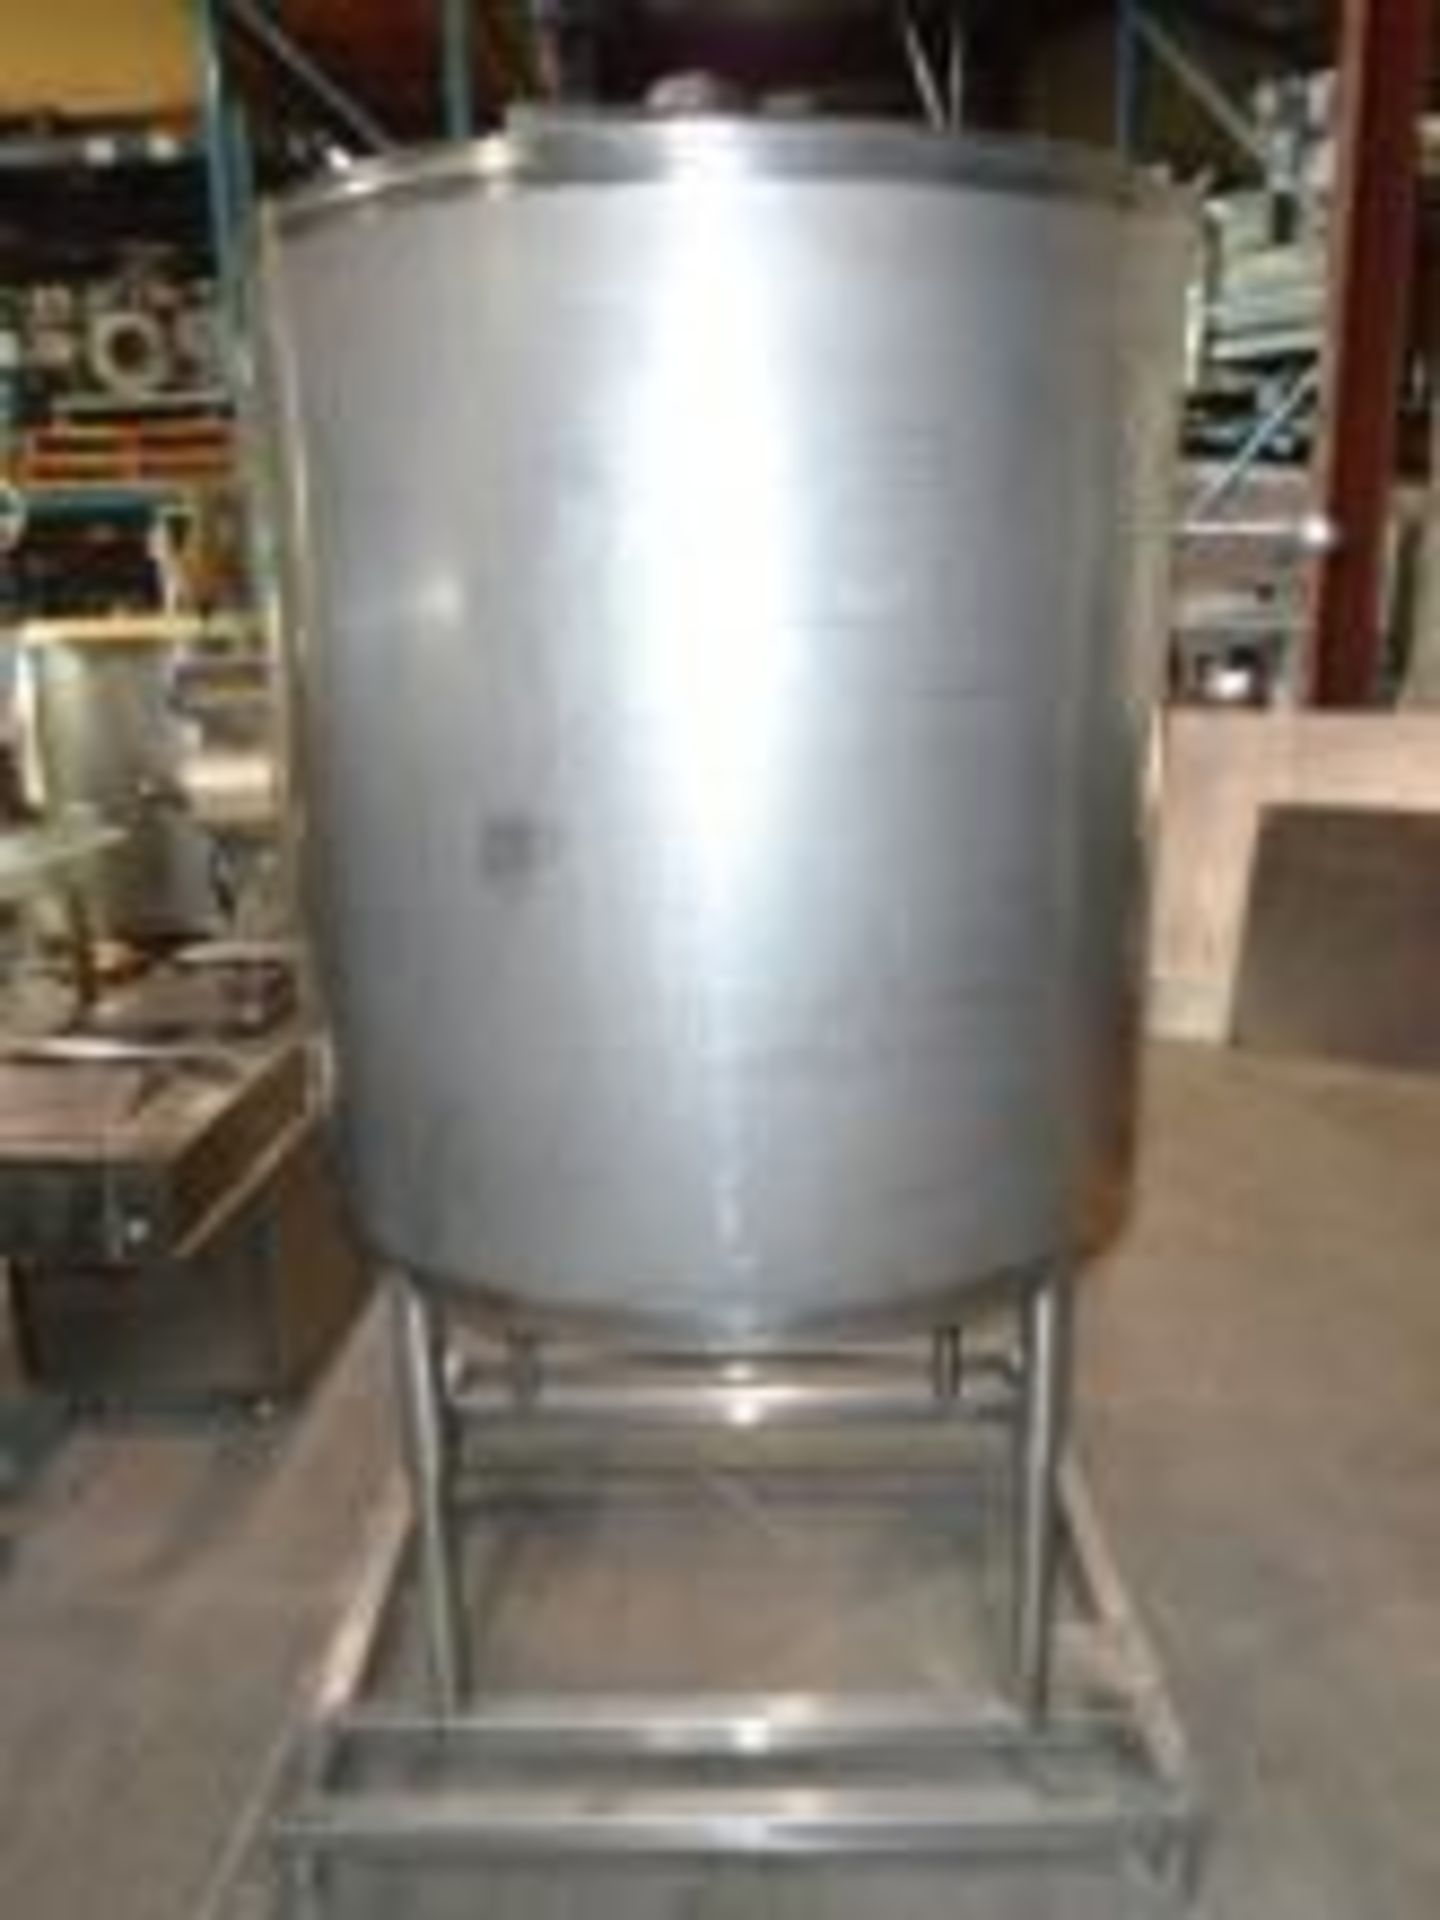 Used 290 Imperial Gallon (350G US) Stainless Steel Tank with Lightnin Mixer.  Used 290 Imperial